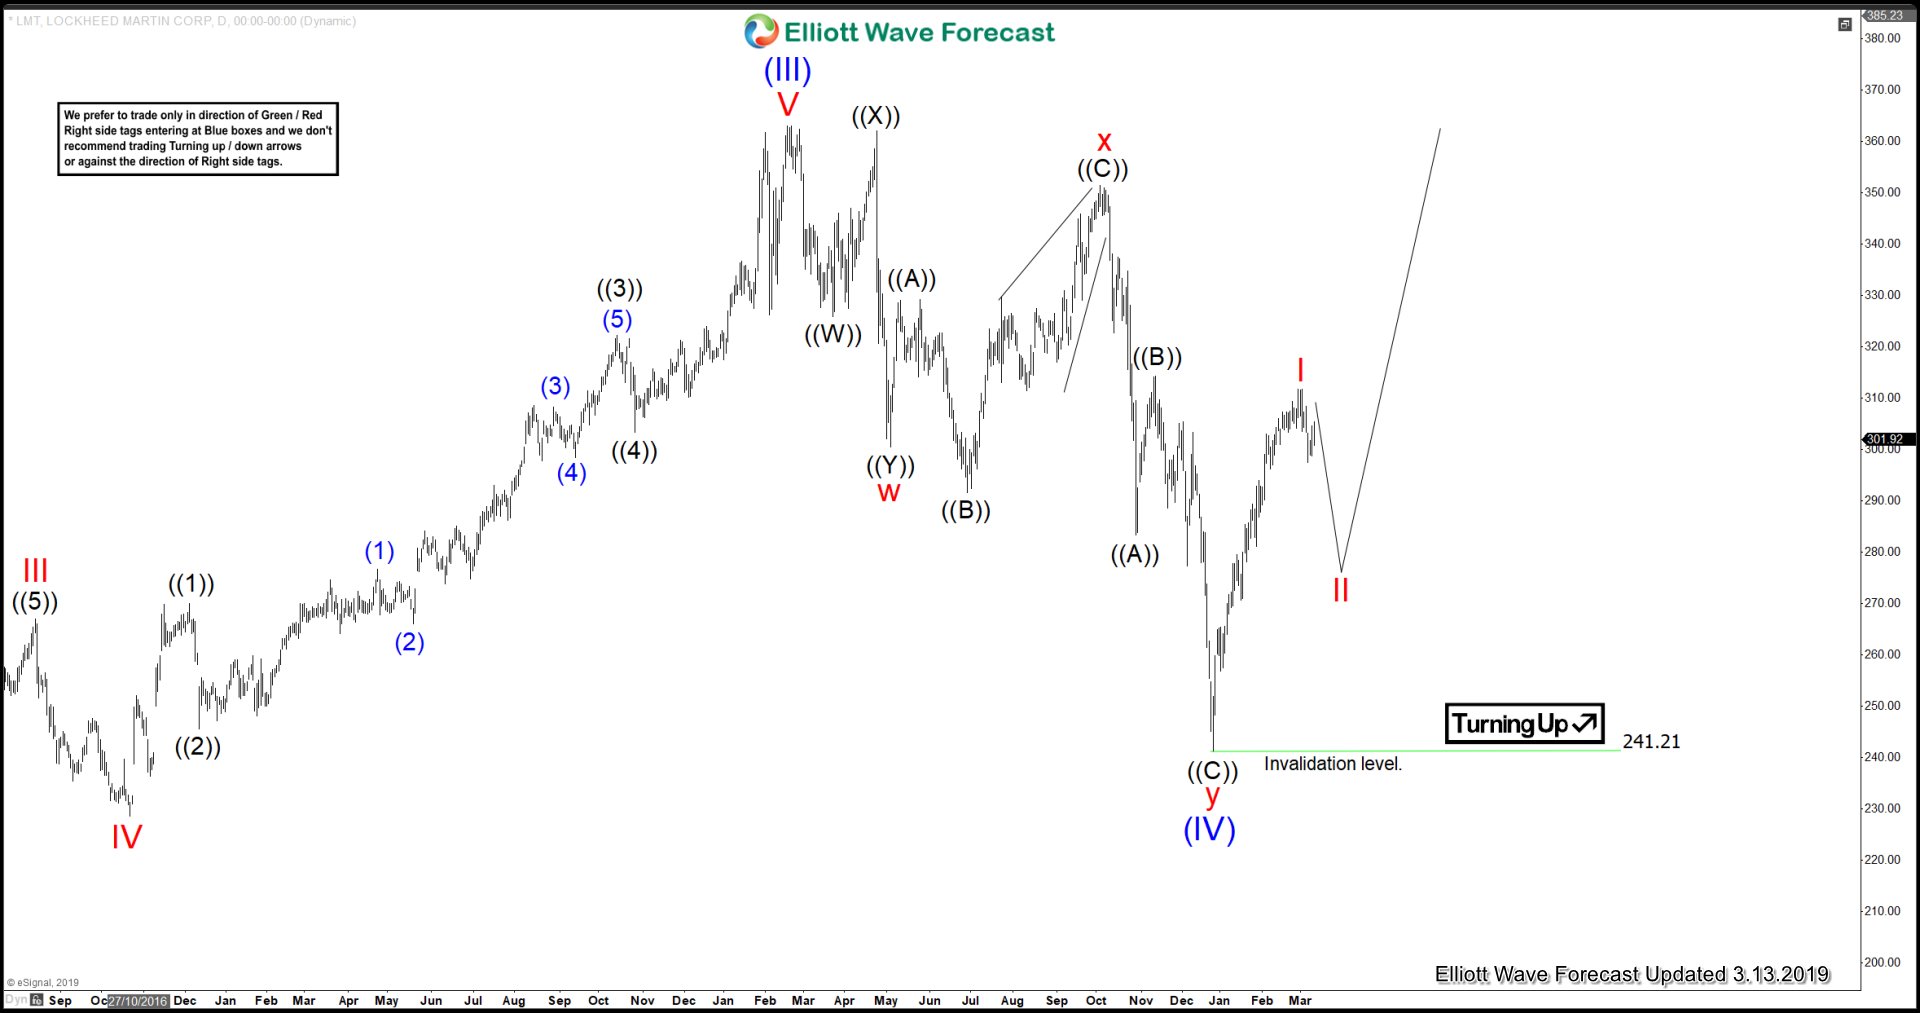 LMT Showing Elliott Wave Impulse Structure From All Time Lows